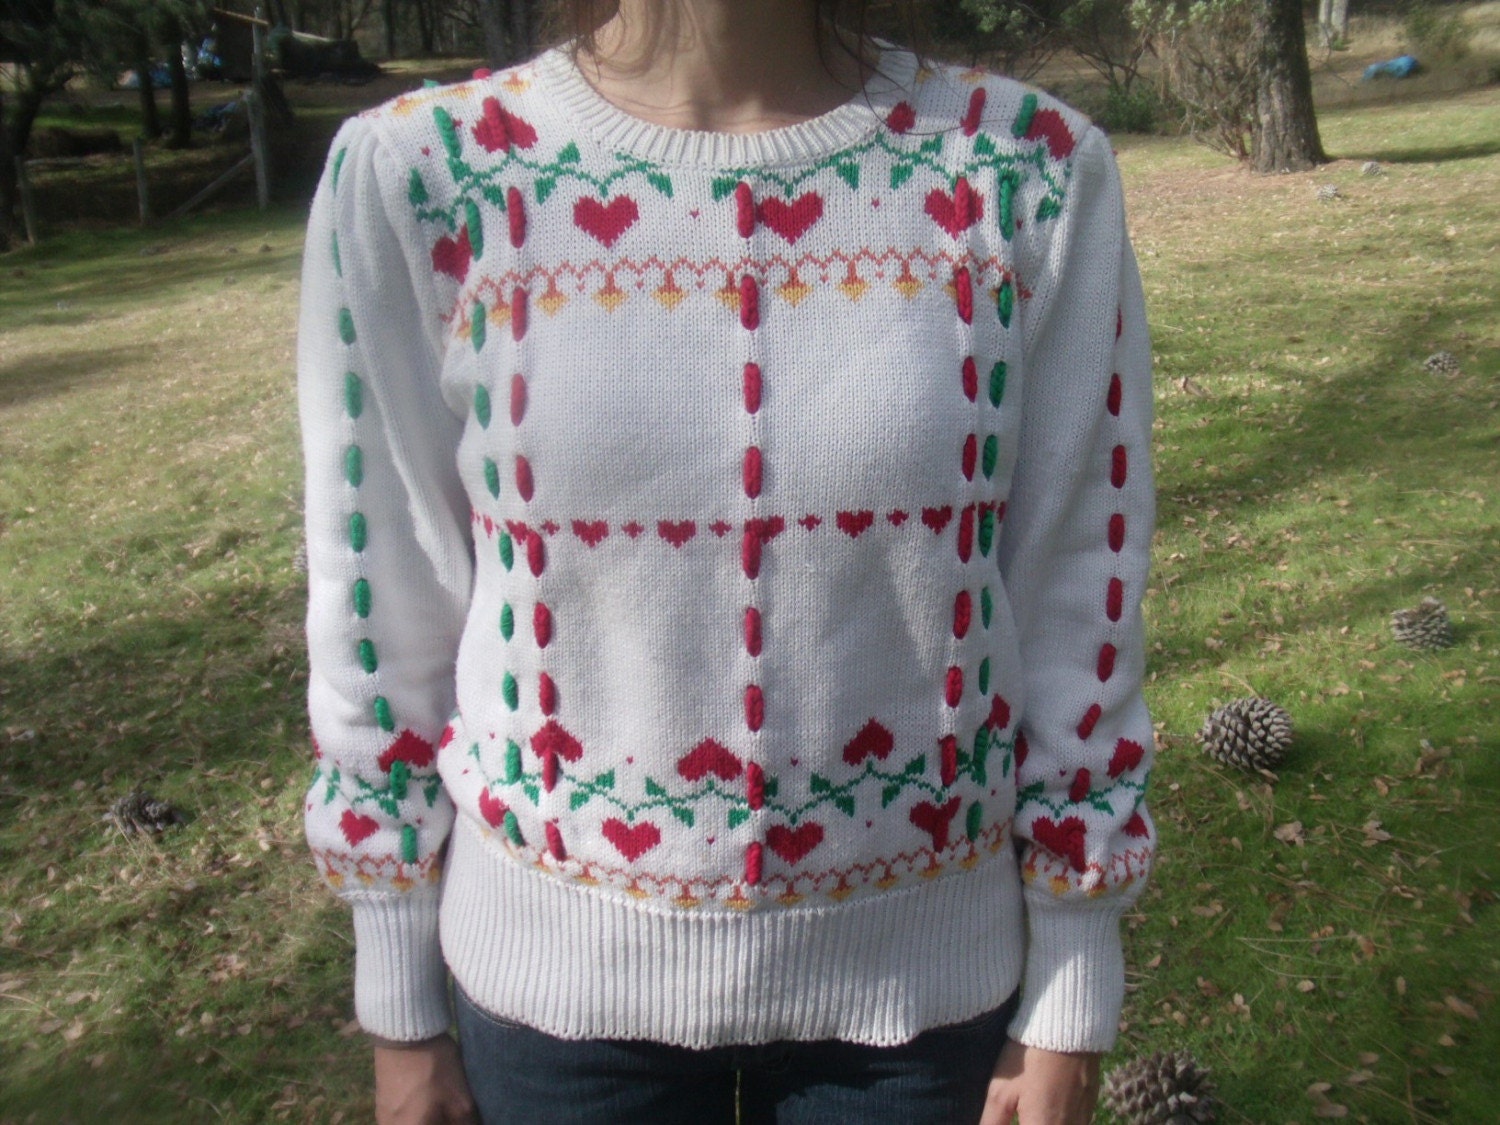 The Actually Cute Ugly CHRISTMAS SWEATER S/M/L